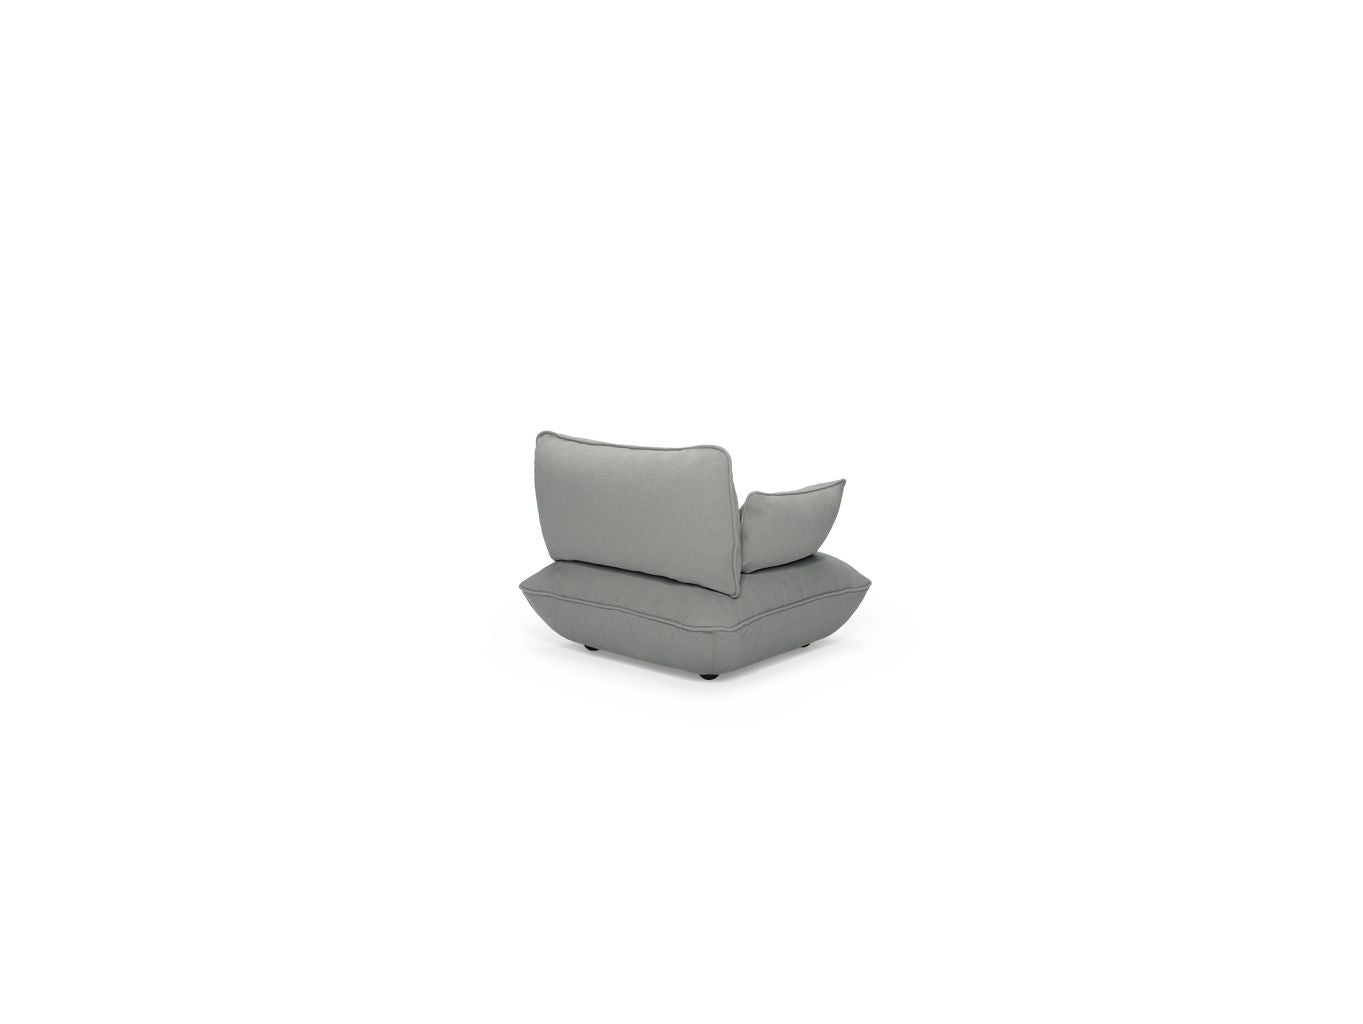 Fatboy Sumo Loveseat, Mouse Grey